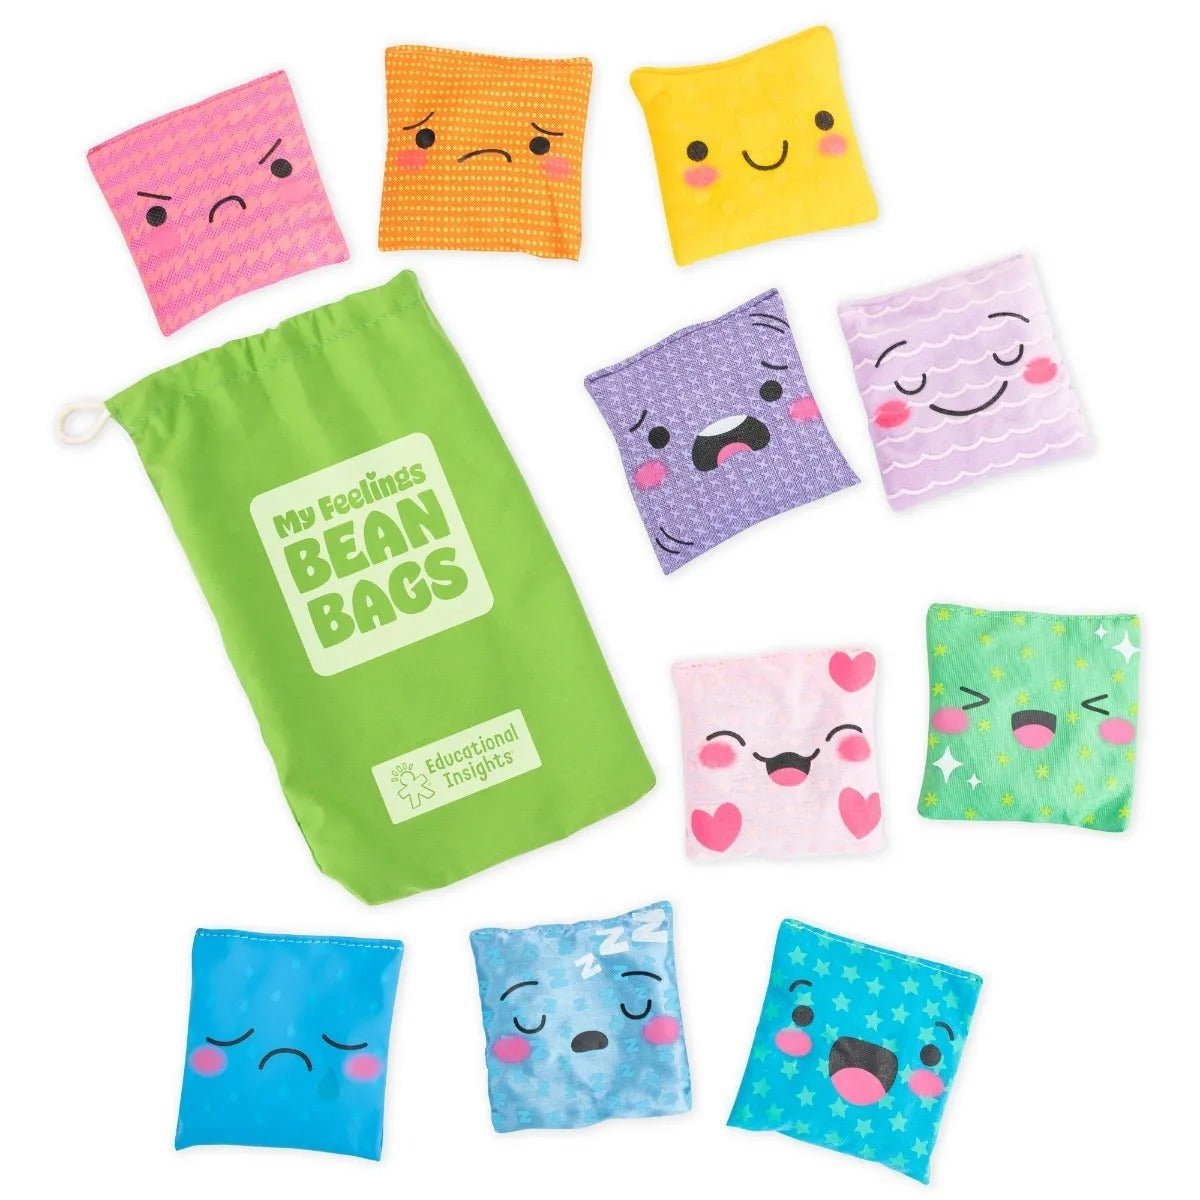 My Feelings Bean Bags, Help young children identify and express their feelings and emotions with this set of 10 tactile bean bags. Each My Feelings Bean Bag features a printed emotion image, including happy, sad, angry, surprised, loved, scared, peaceful, excited, sleepy, and disappointed, in a colour and texture that corresponds uniquely to that emotion. The My Feelings Bean Bags store in the included drawstring carry bag, and the set comes with a parent/teacher activity guide. Help young children express 